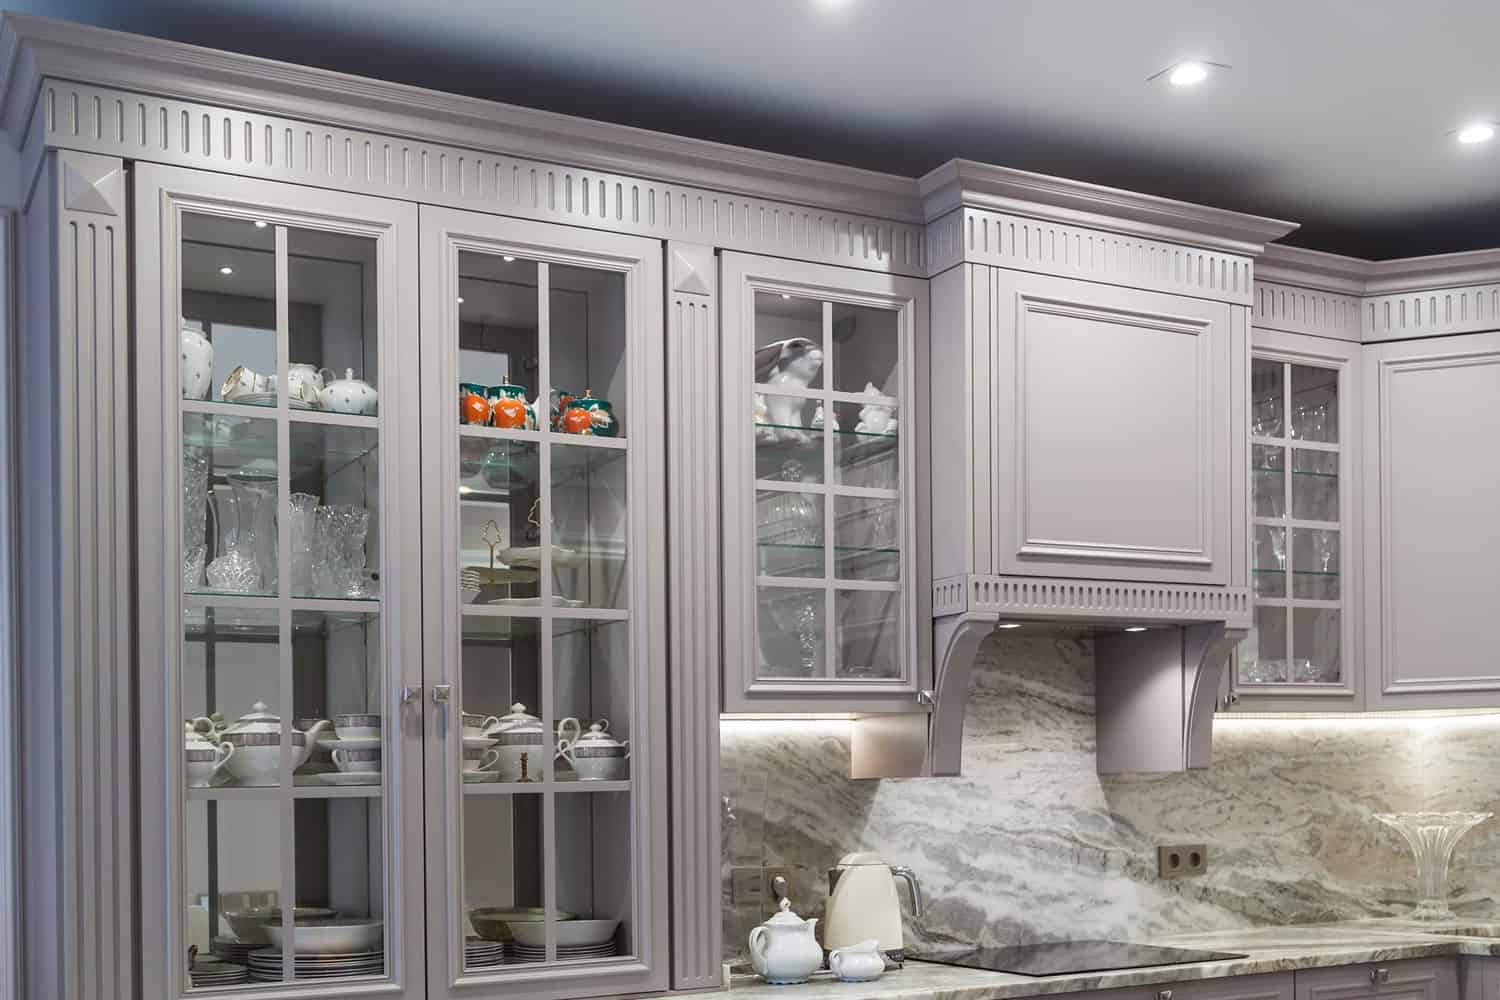 Luxury Modern kitchen with full gray cabinets